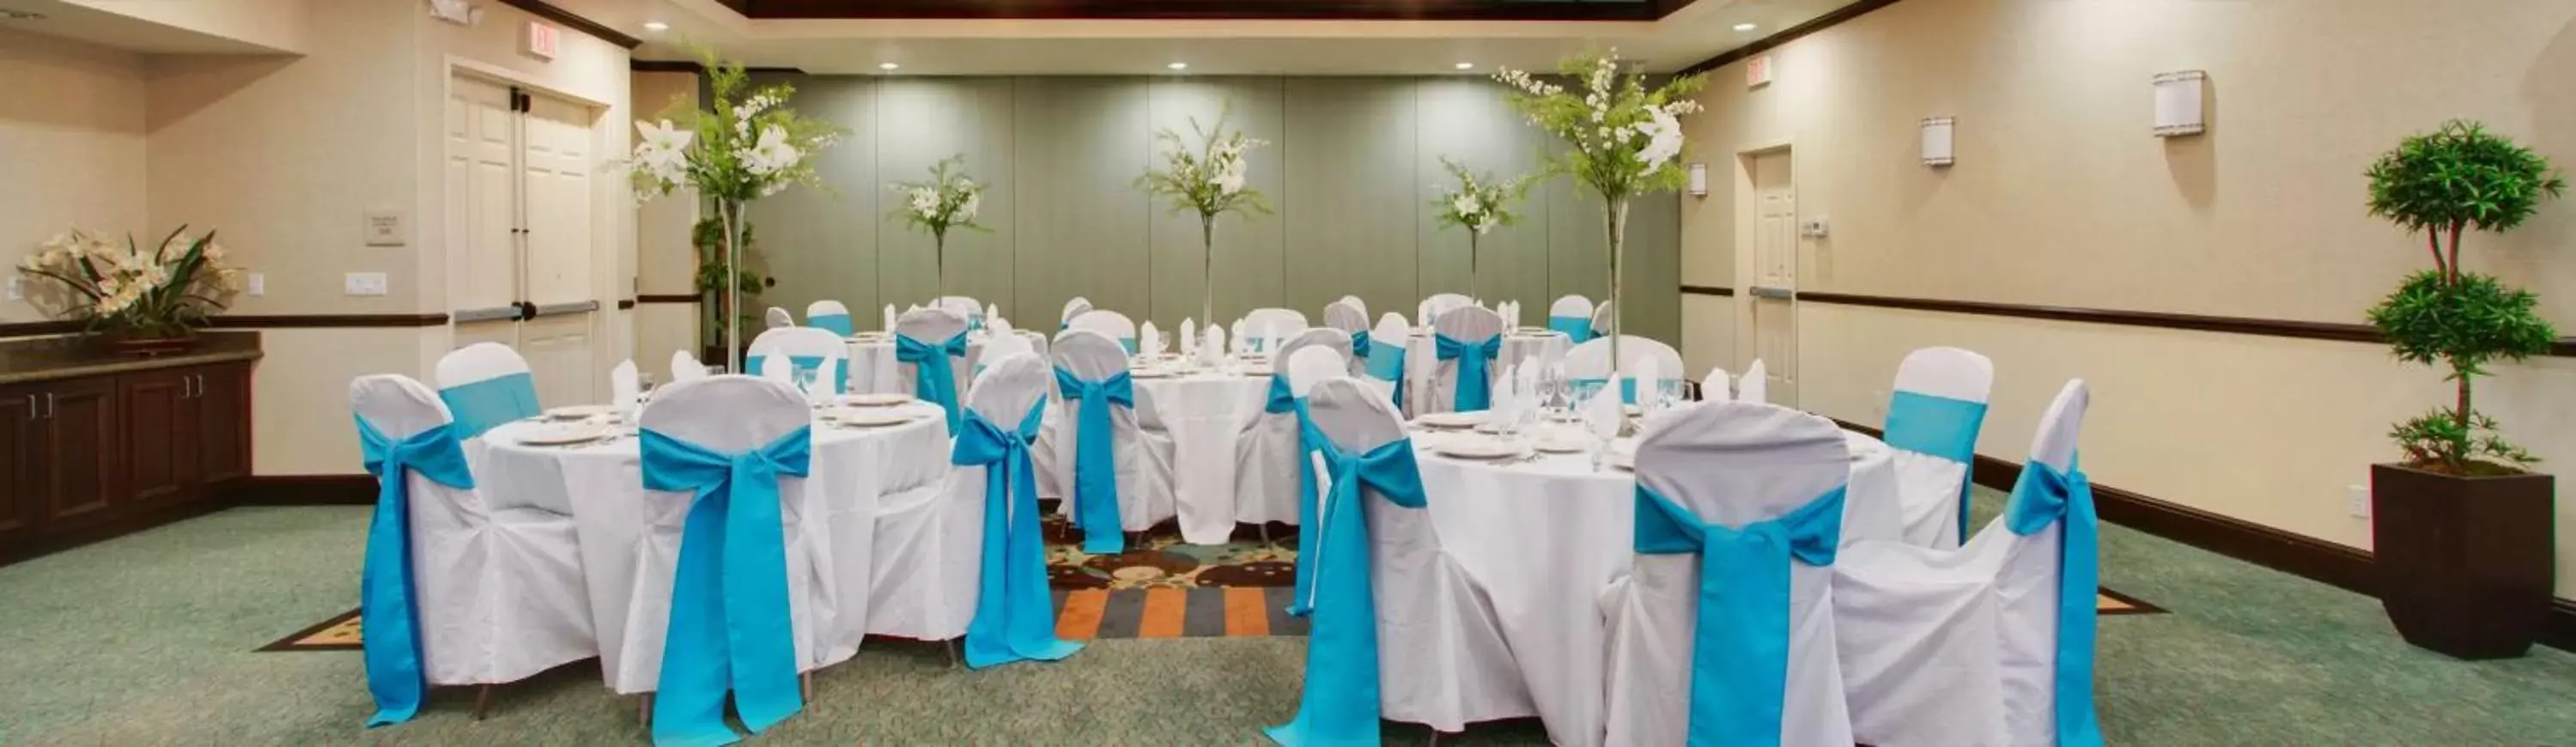 Meeting/conference room, Banquet Facilities in Hilton Garden Inn Ames